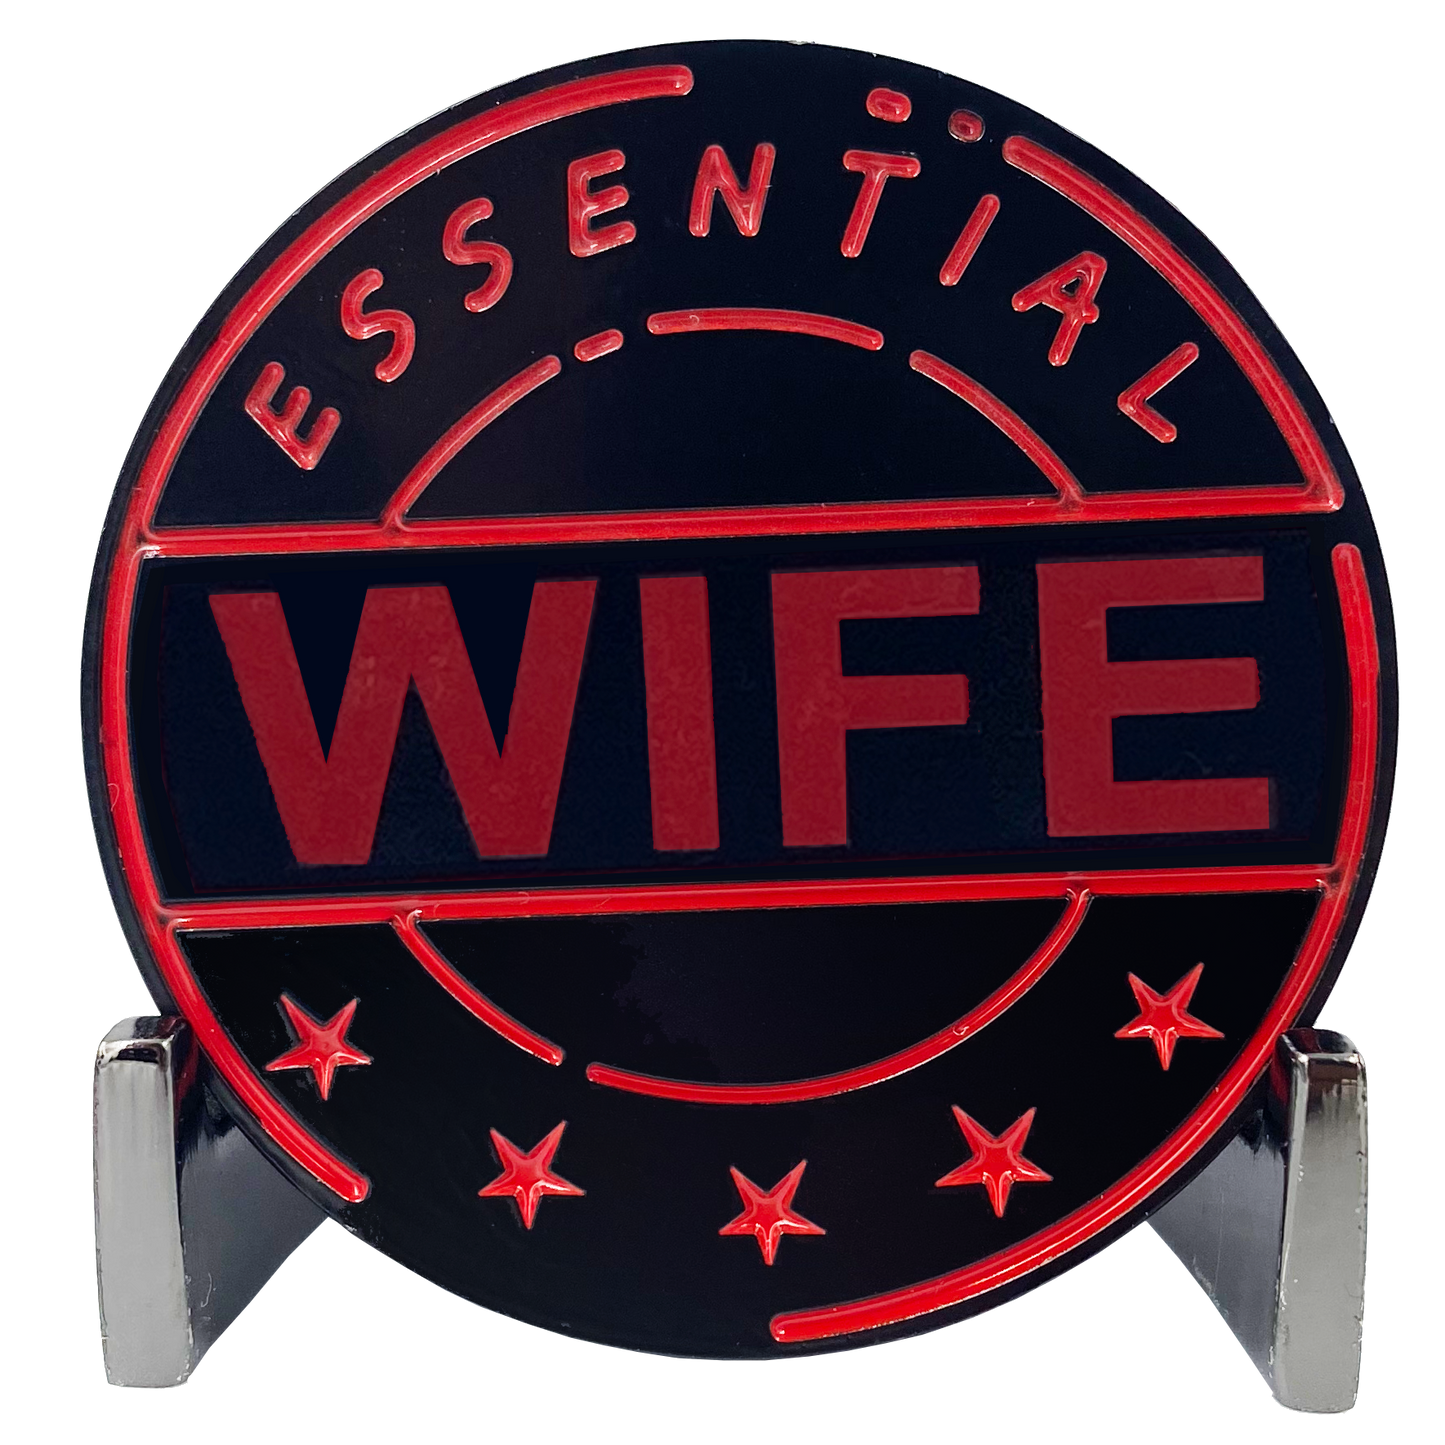 CL8-15 Essential Workers Wife Challenge Coin perfect for Mother's Day or Wifey's Birthday